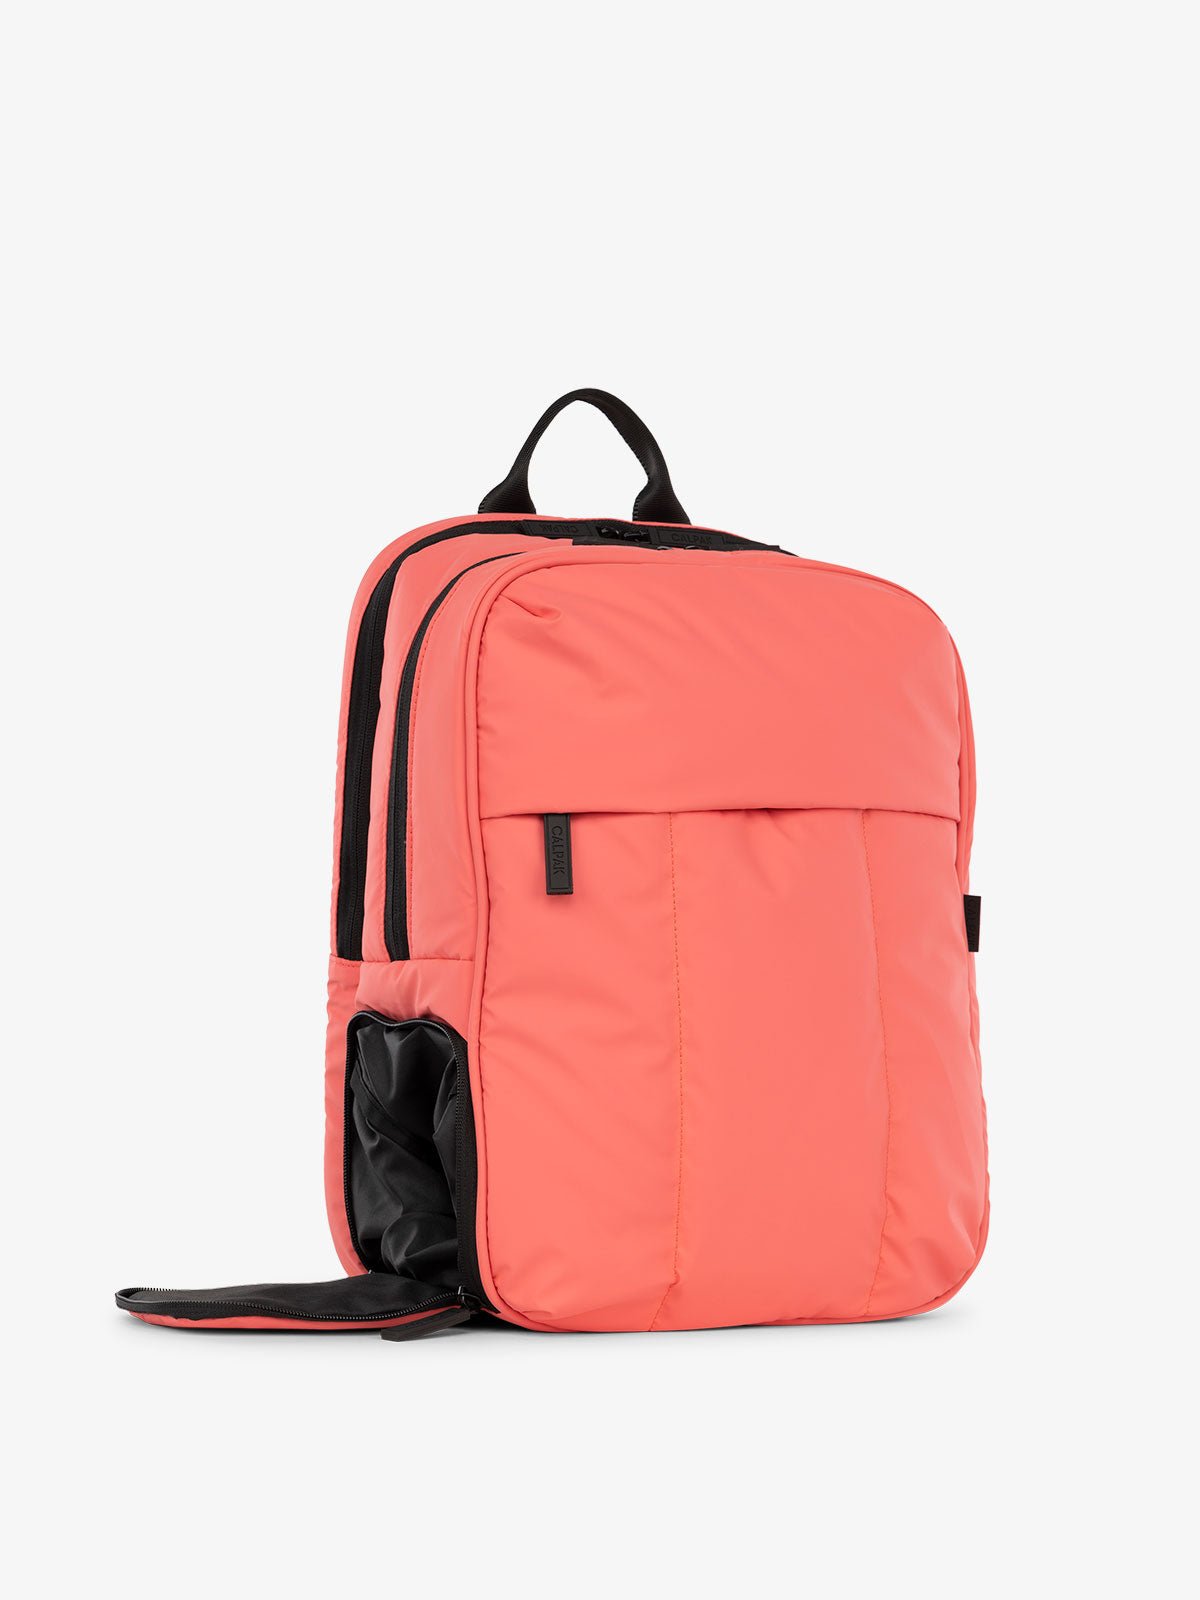 CALPAK Luka Laptop travel Backpack with shoe compartment in watermelon pink